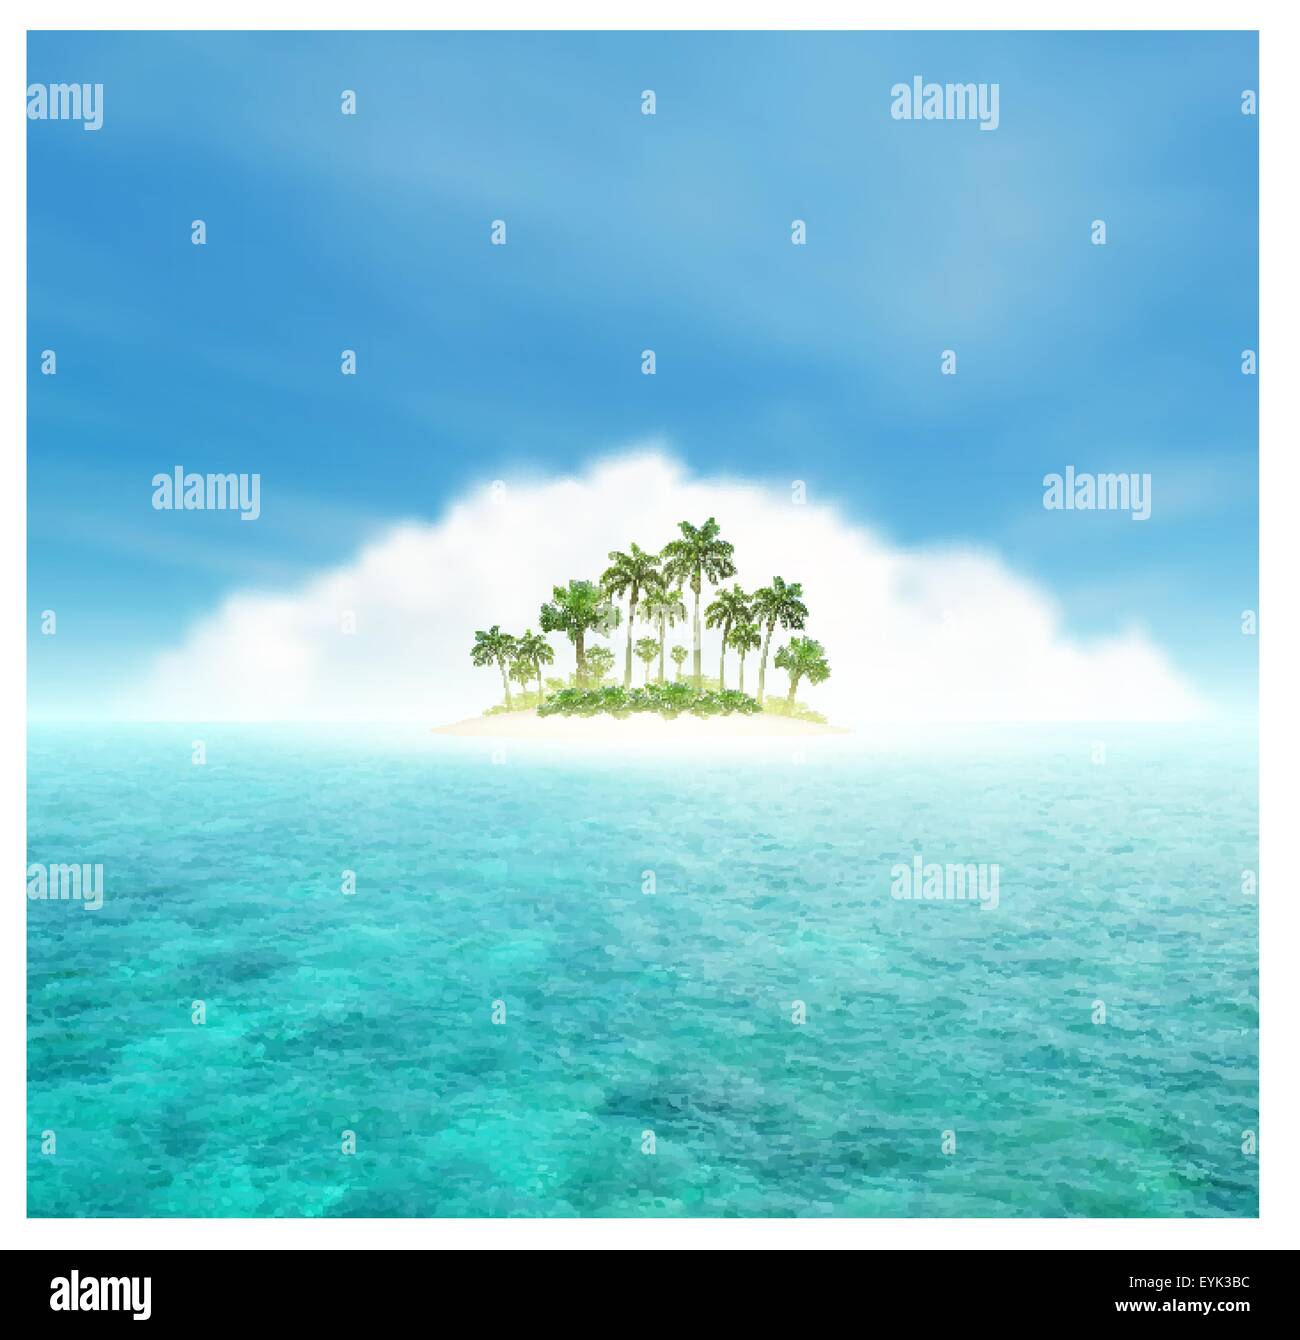 Sky, Cloud, Ocean And Tropical Island With Palms Stock Vector